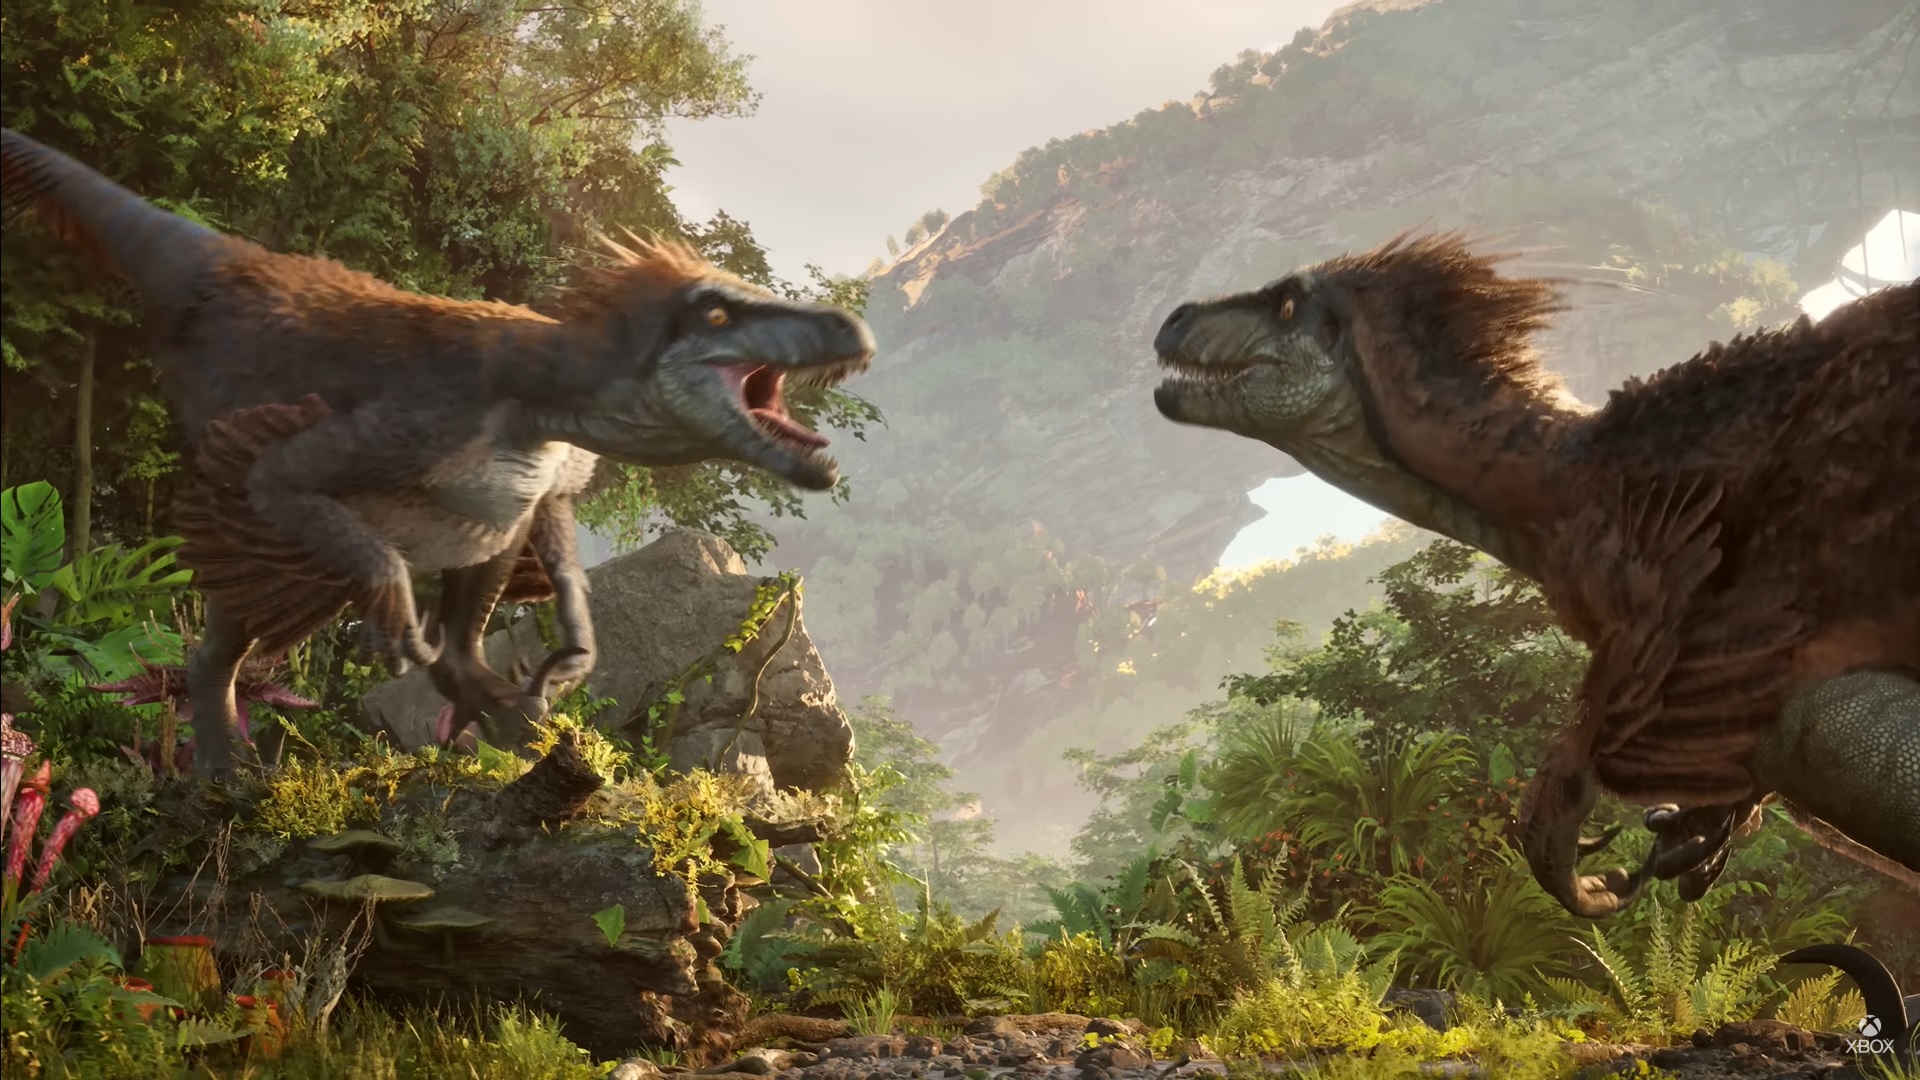 Ark 2 to the cinema?: the action video game that will have Vin Diesel taming a T-Rex could also reach the big screen